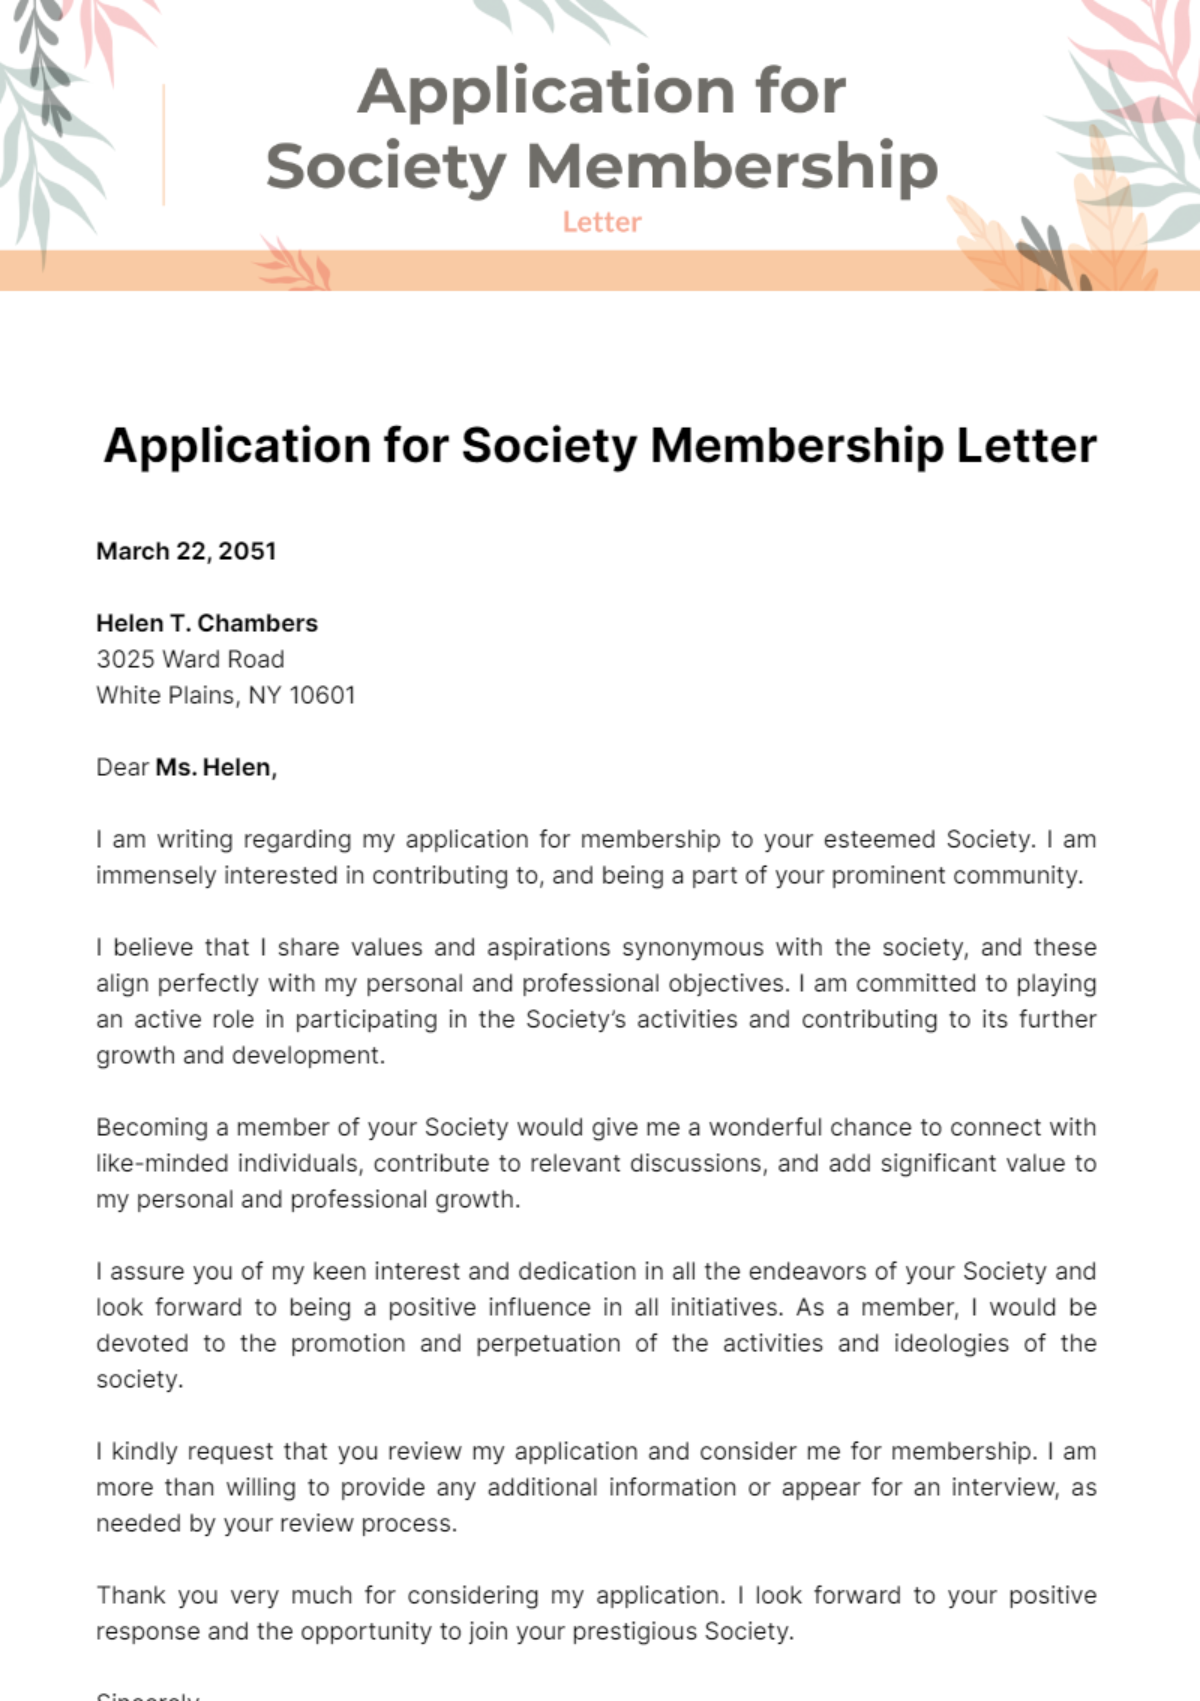 Free Application Letter for Society Membership Template